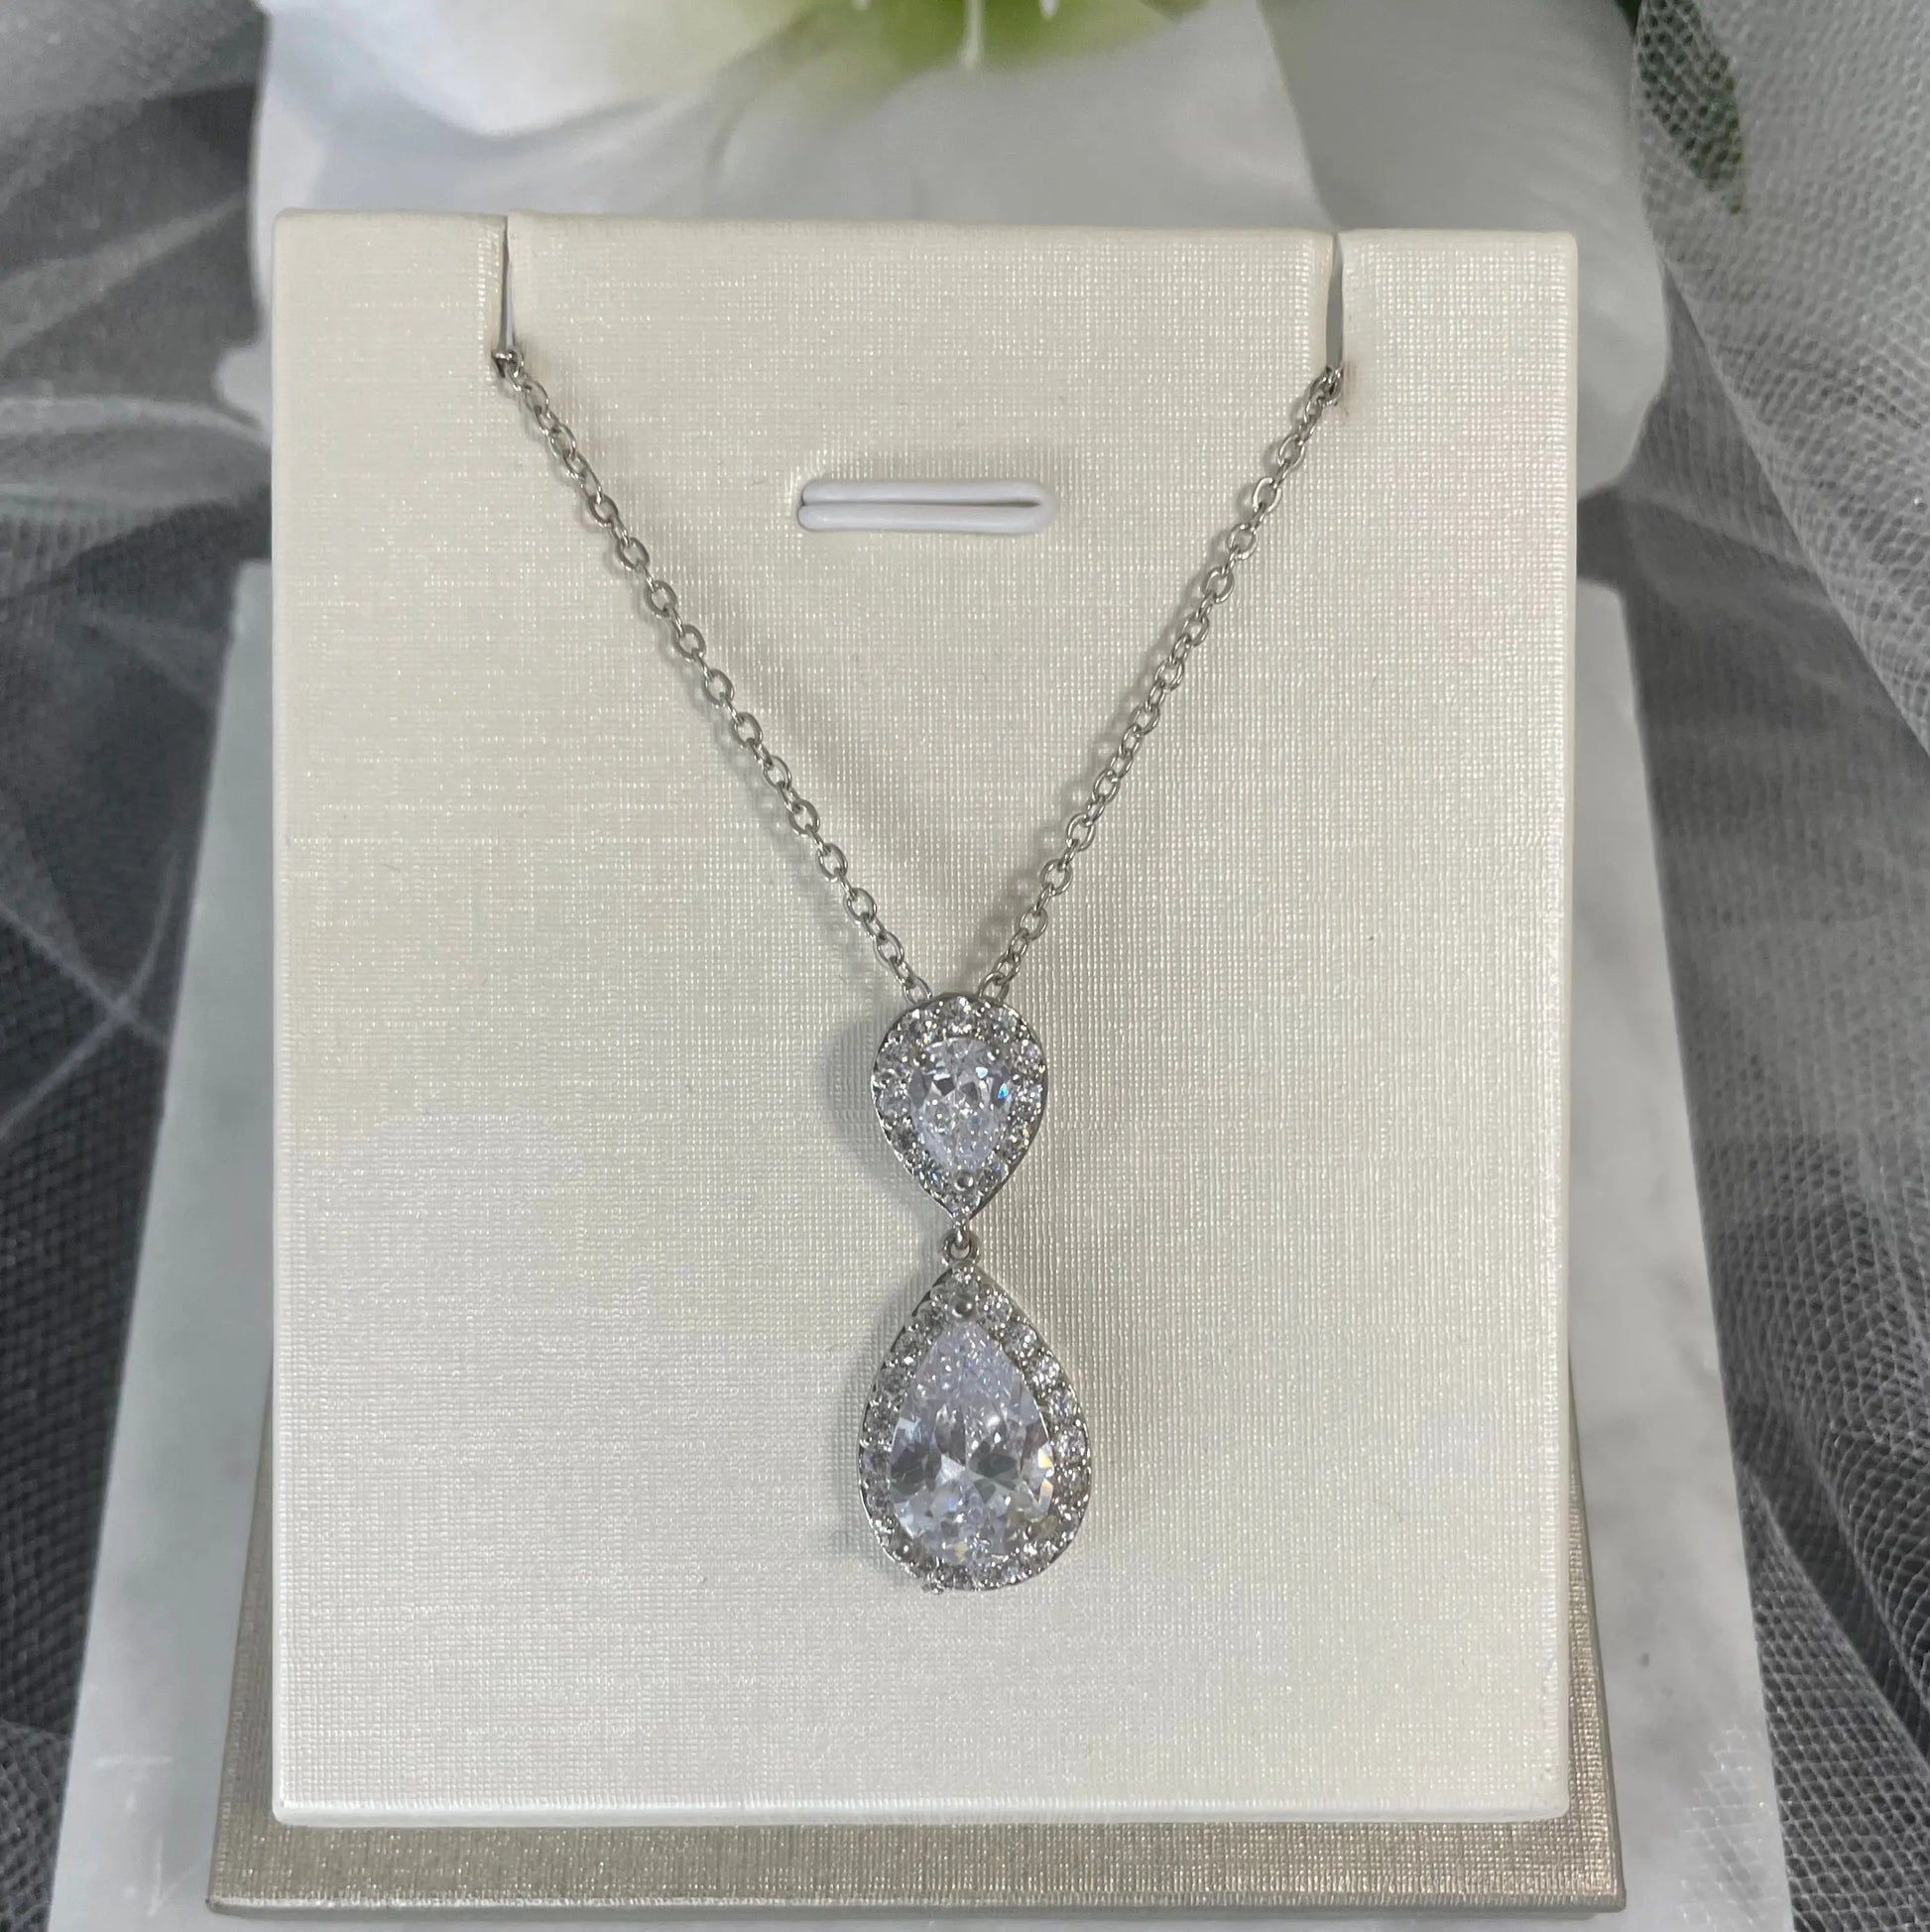 Leona Necklace (Silver): A beautiful silver necklace featuring a large CZ stone surrounded by smaller CZs, with a 45.5 cm chain.